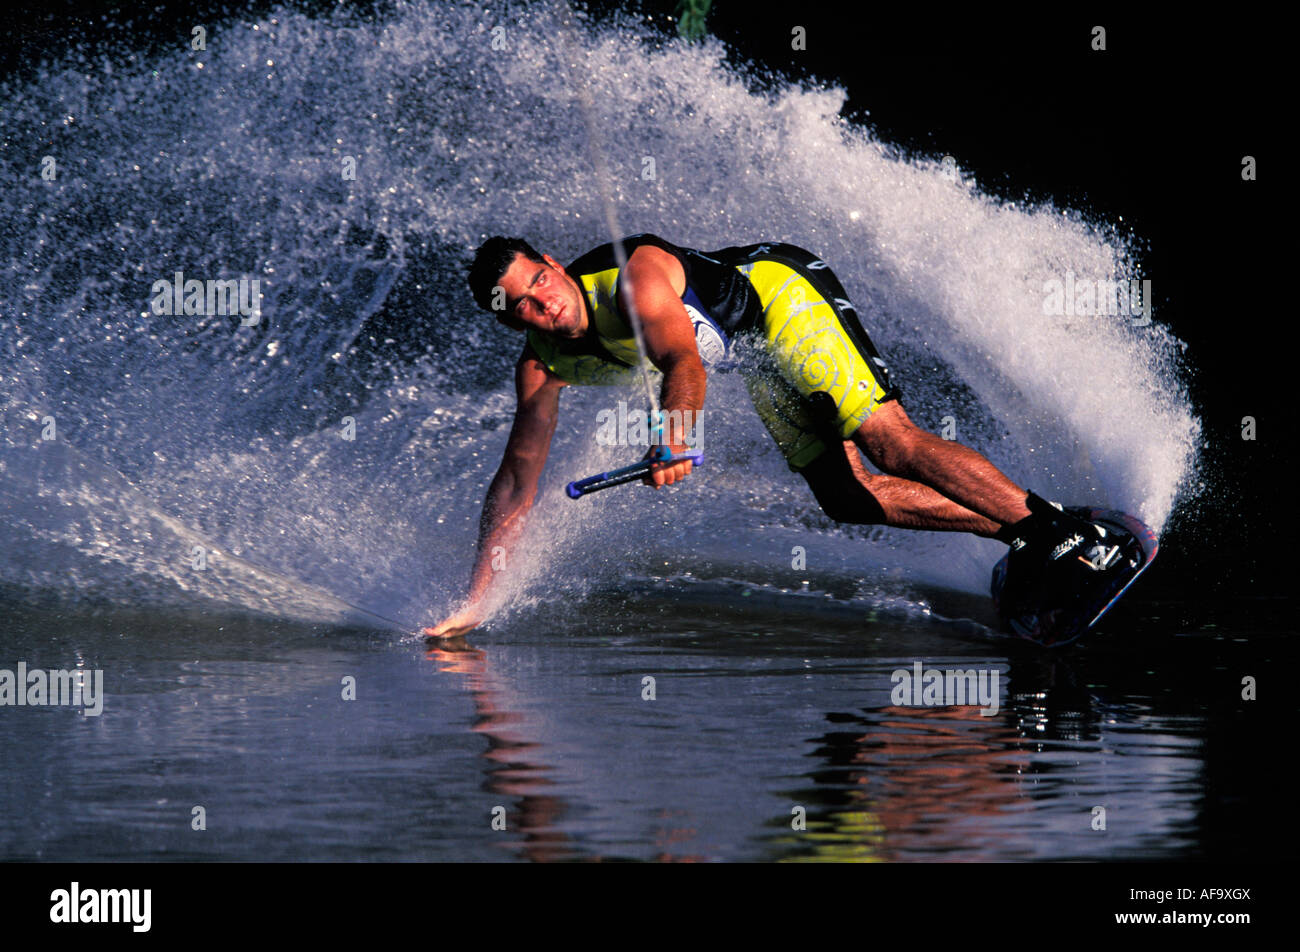 Water-skier on a wakeboard makes a sharp turn dragging his hand on the water surface South Africa Stock Photo